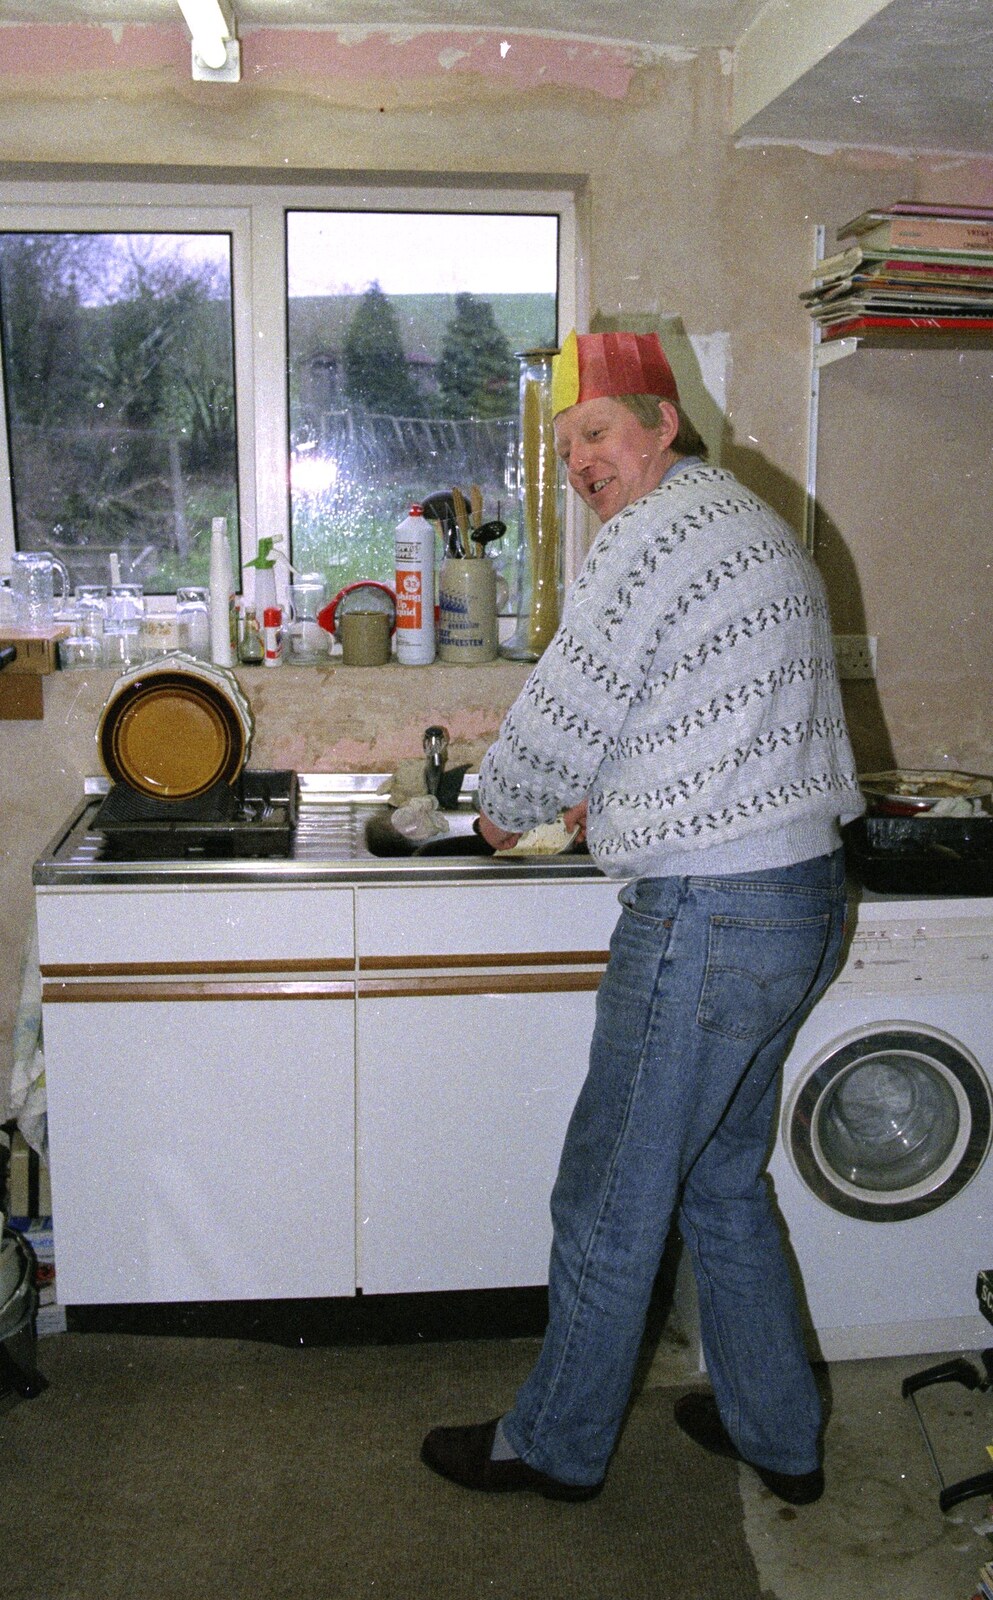 Alan does the washing up from Late Night, and Christmas with the Coxes, Needham, Norfolk - 25th December 1989